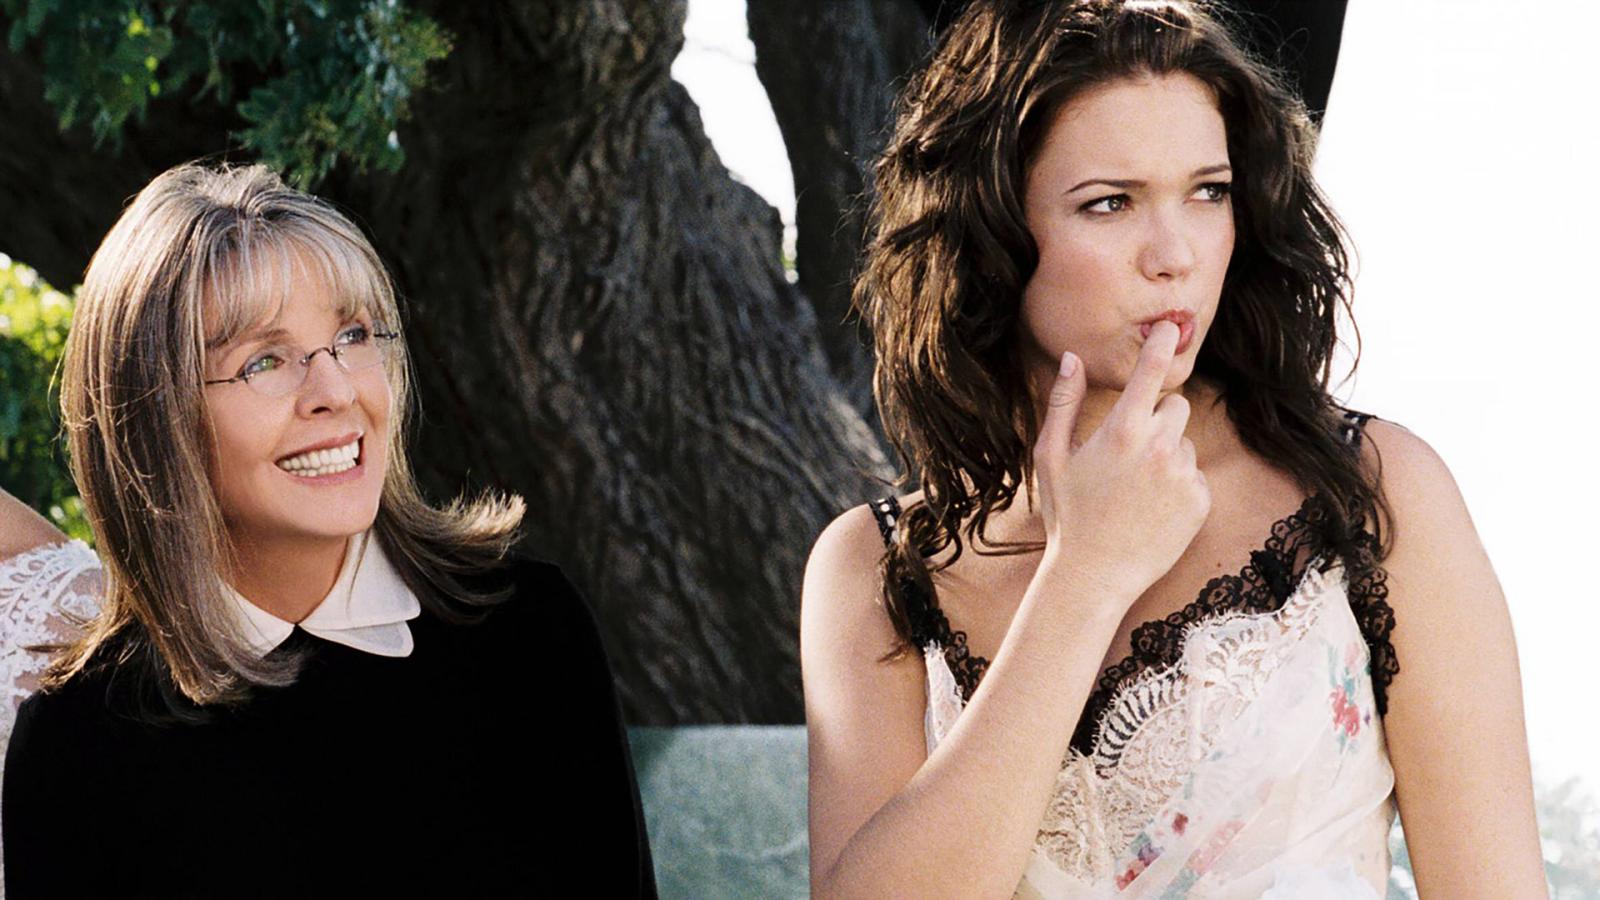 15 Romance Movies from the 2000s So Bad, They're Actually Good - image 15